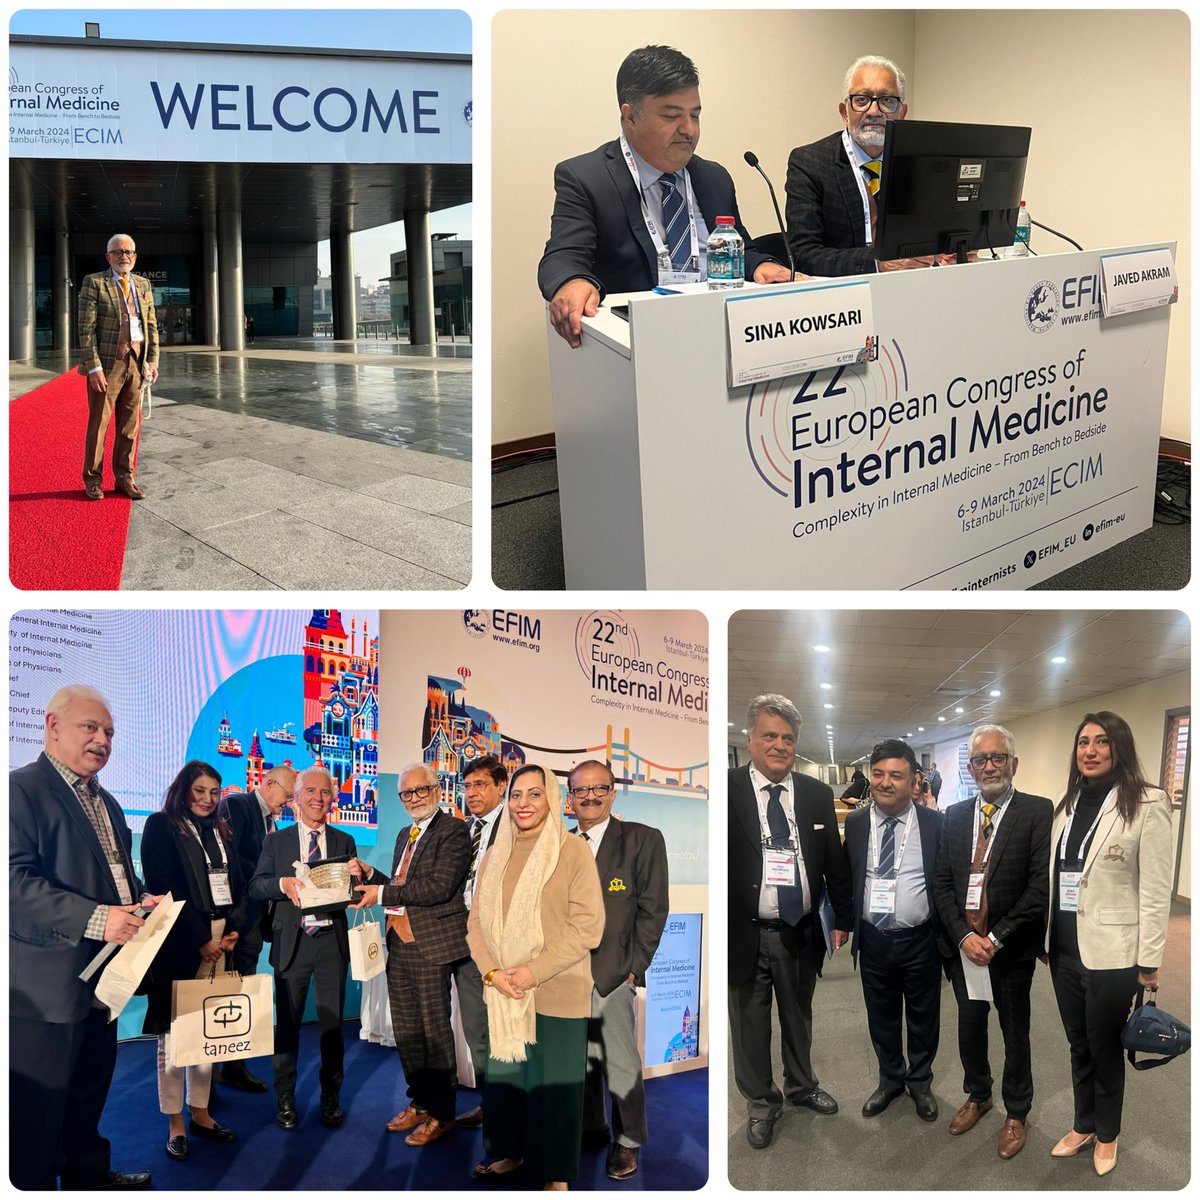 Prof. Javed Akram has been honored with the prestigious role of chairing the 22nd European Congress of Internal Medicine in Istanbul.